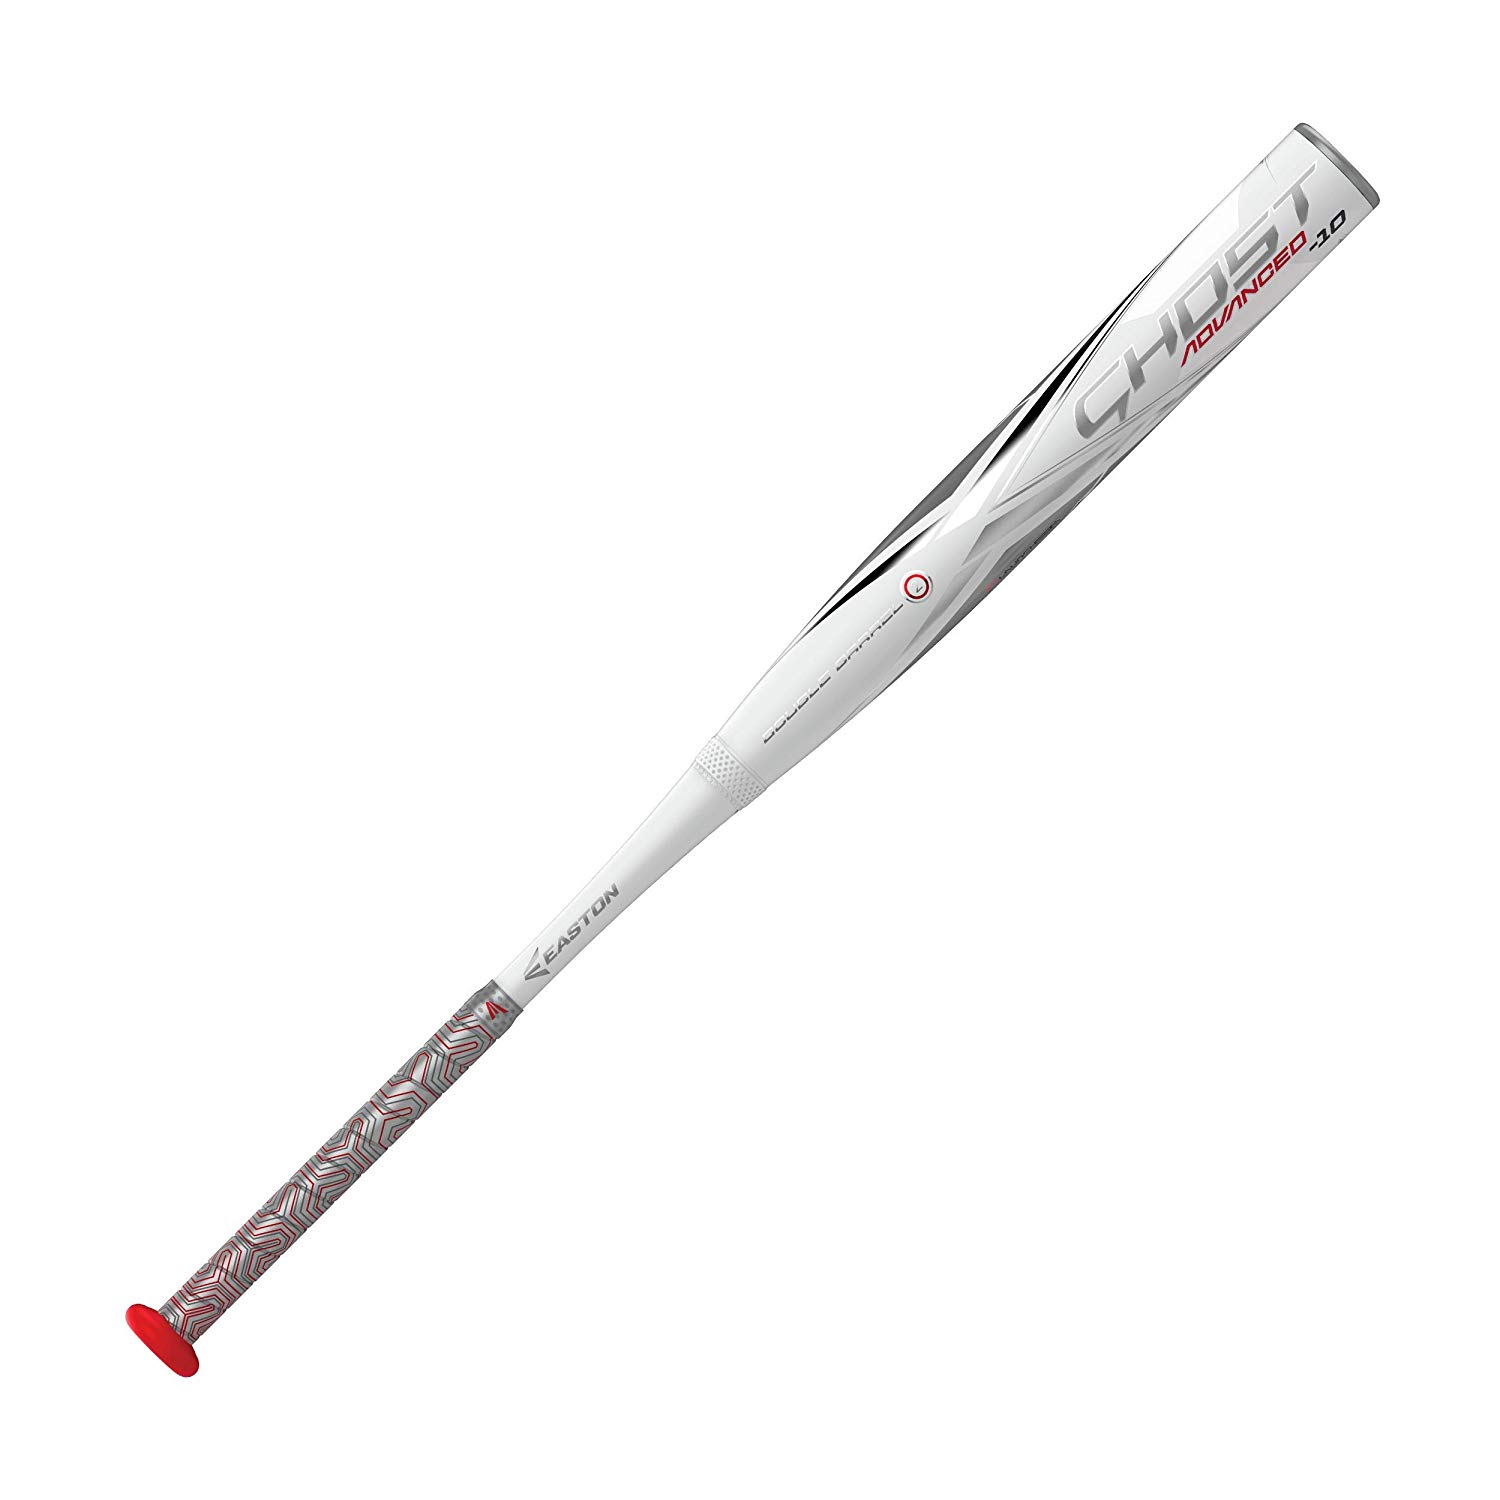 easton-ghost-advanced-2020-dual-stamp-fast-pitch-softball-bat-33-inch-23-oz FP20GHAD10-3323 Easton 628412270714 Double Barrel 2 – Second generation Double Barrel construction combines a